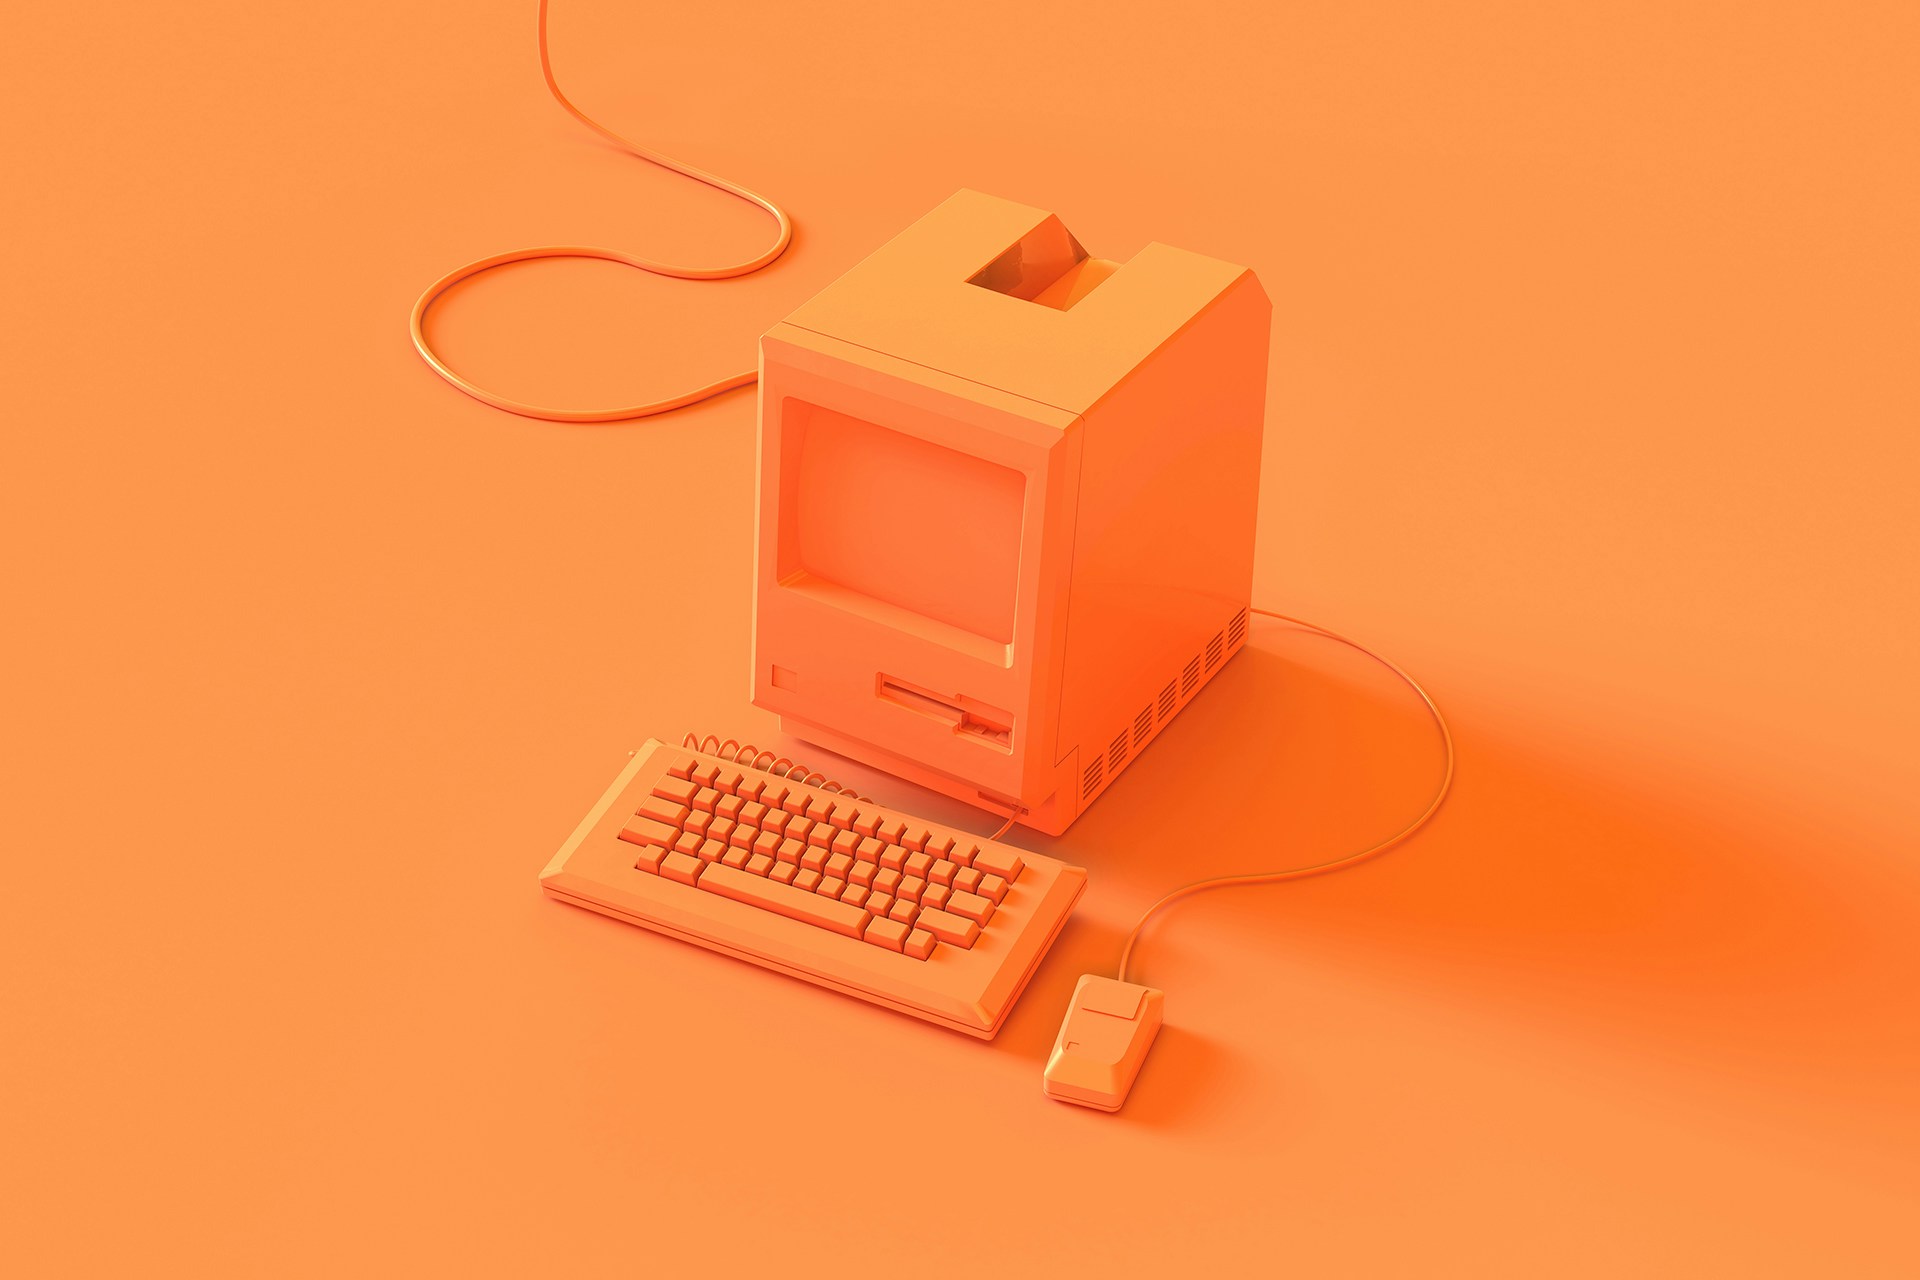 A retro computer that is painted orange against an orange backdrop for this blog on big data for businesses